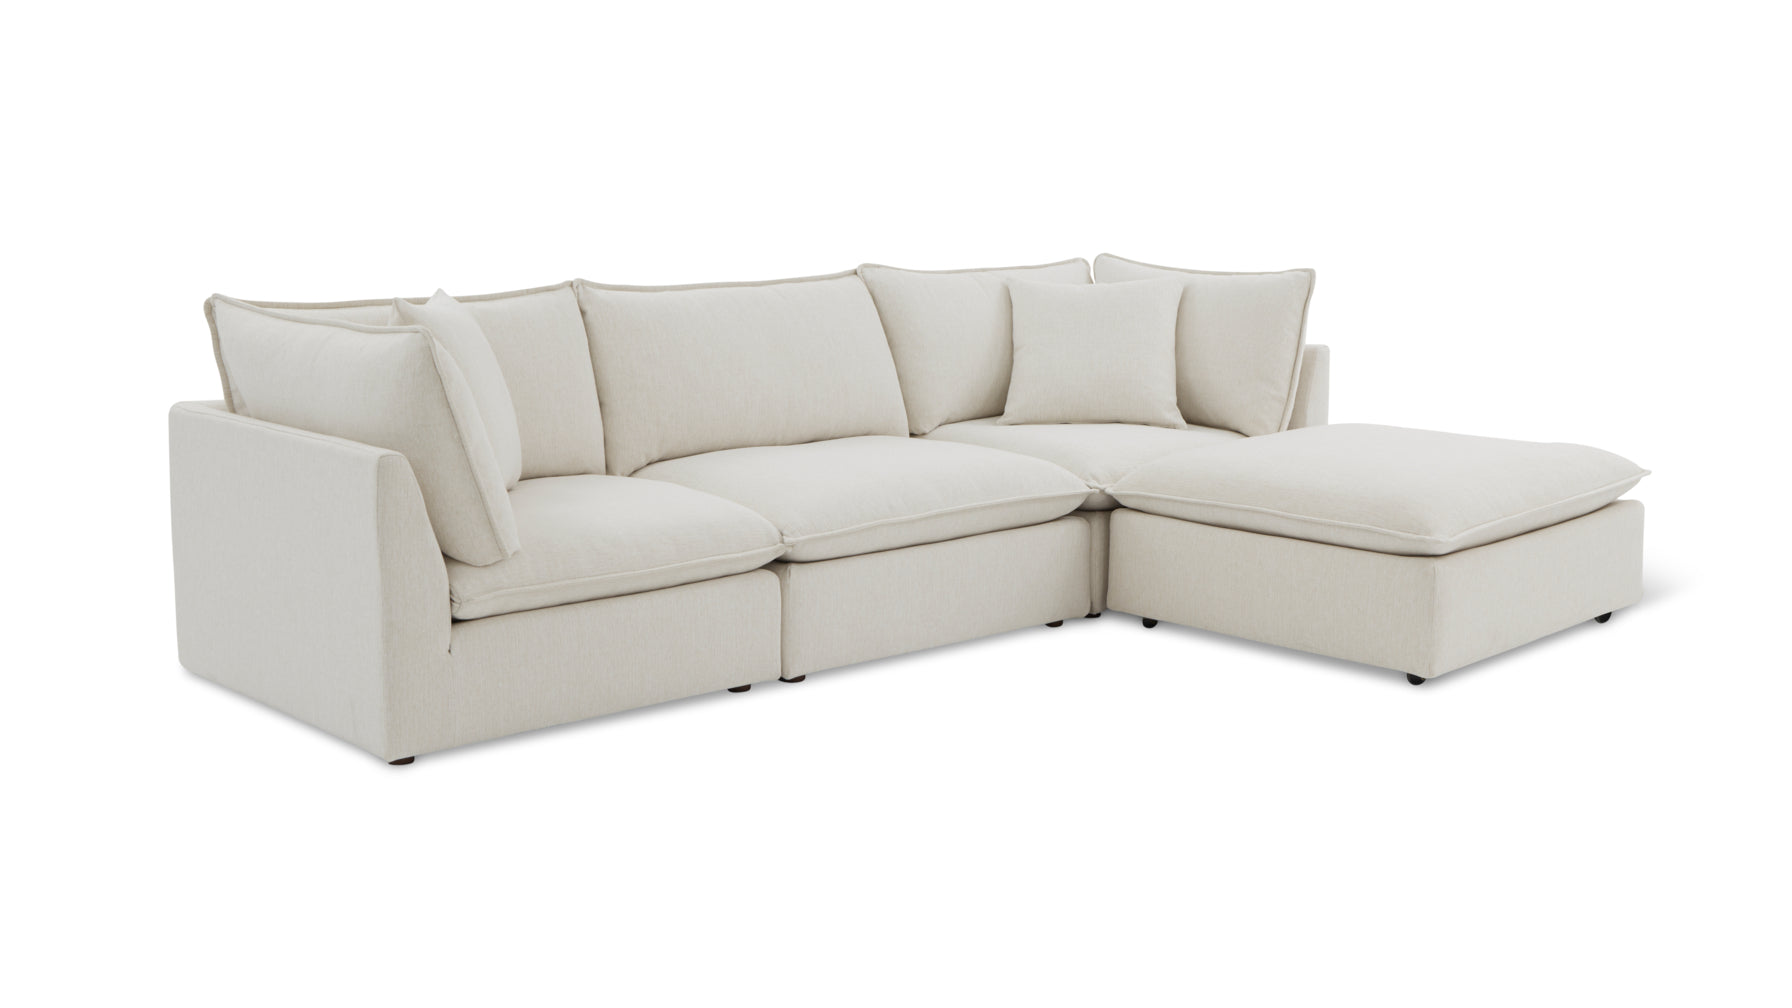 Chill Time 4-Piece Modular Sectional, Birch - Image 4